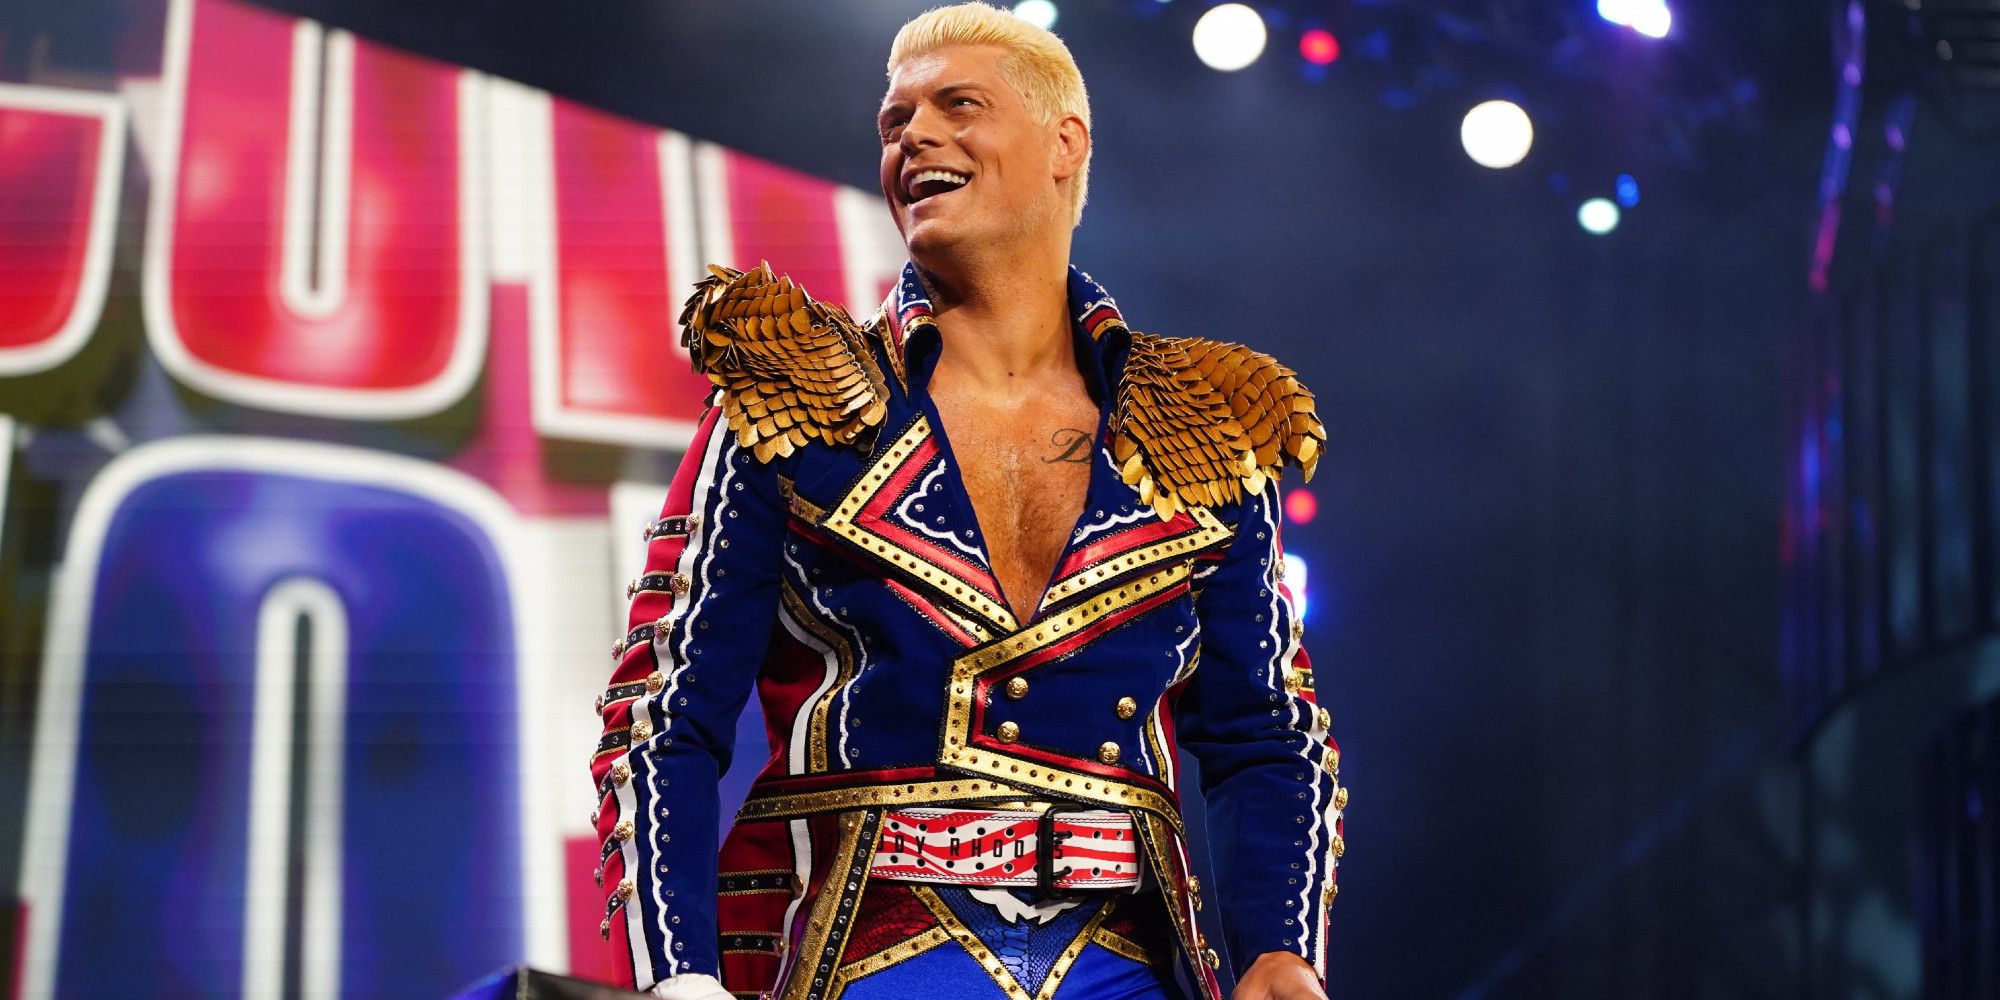 Why Cody Rhodes Left AEW & Returned To WWE